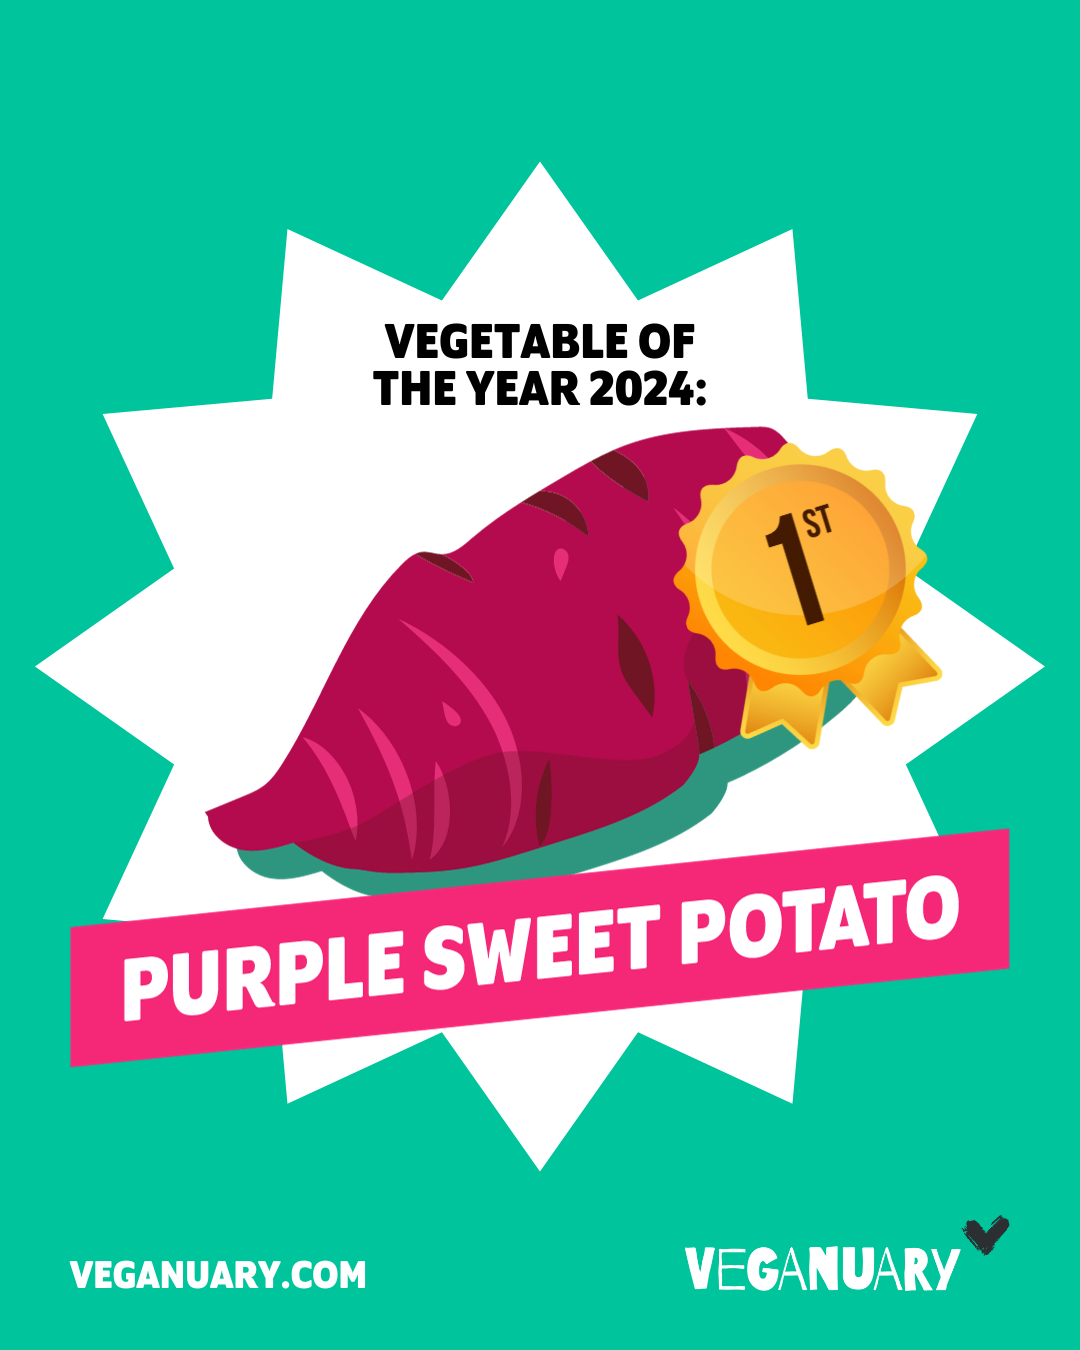 Media image of the purple sweet potato with a gold 1st place badge